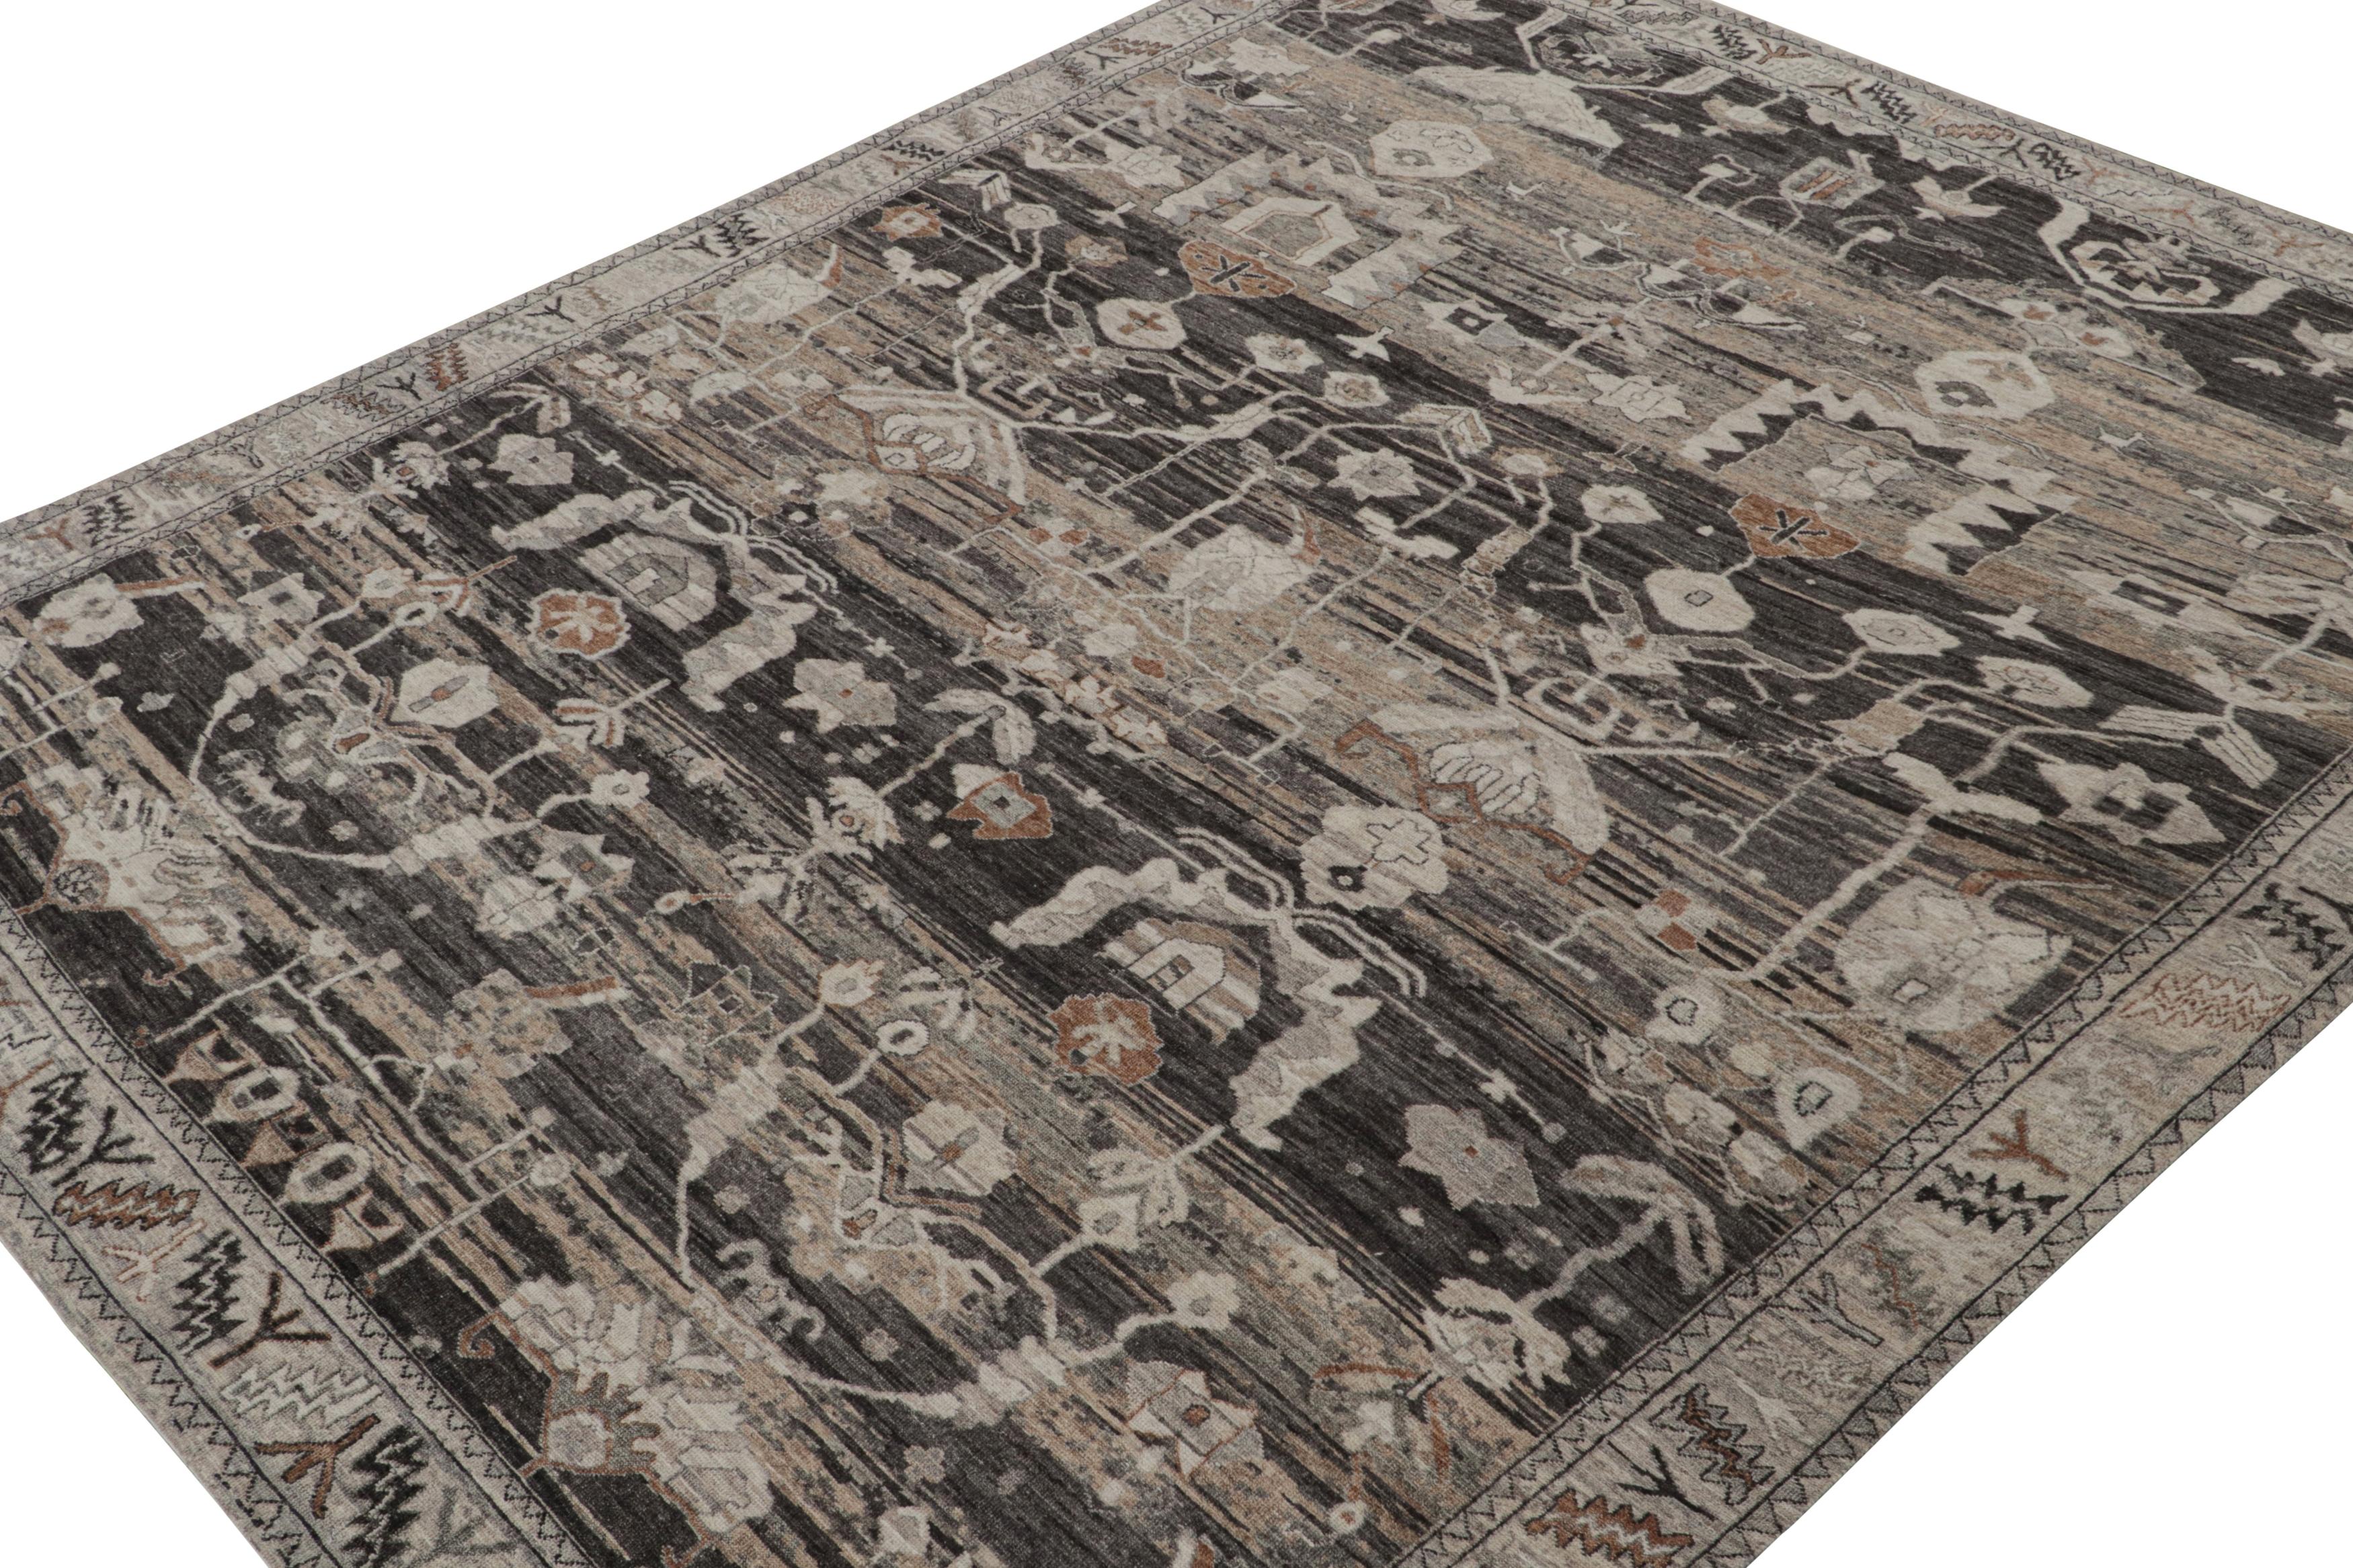 Hand-knotted in wool and silk, this 9x12 rug is a new release from the Modern Classics Collection by Rug & Kilim. Its design features geometric floral patterns with bold industrial tones in a subversive new take on primitivist Oriental rug